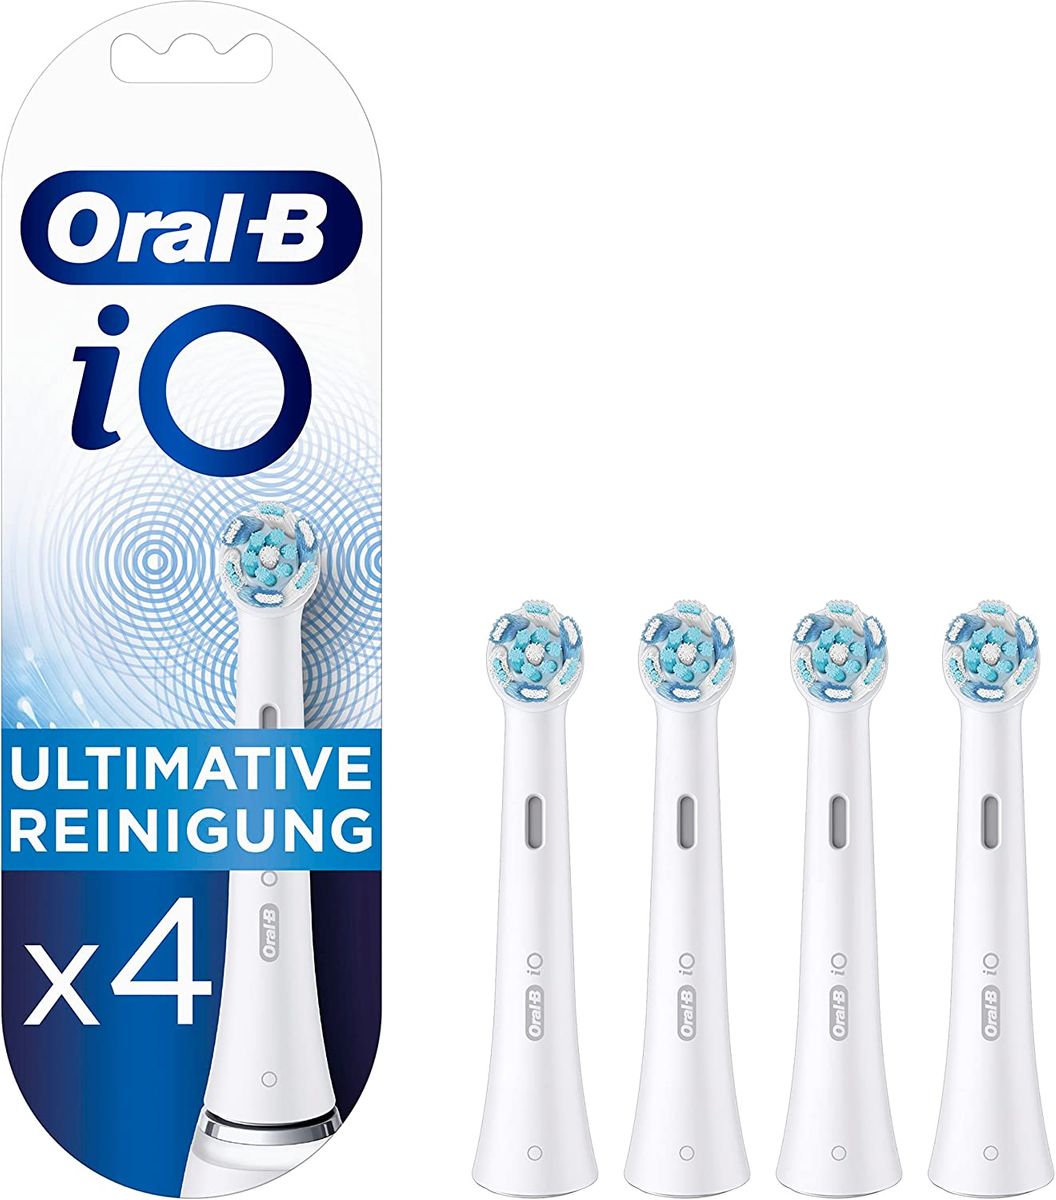 Oral-B iO Ultimate Cleaning Attachment Brushes for Electric Toothbrush, 4 pieces, ultimate tooth cleaning with iO technology, letterboxable package White 4 pieces.